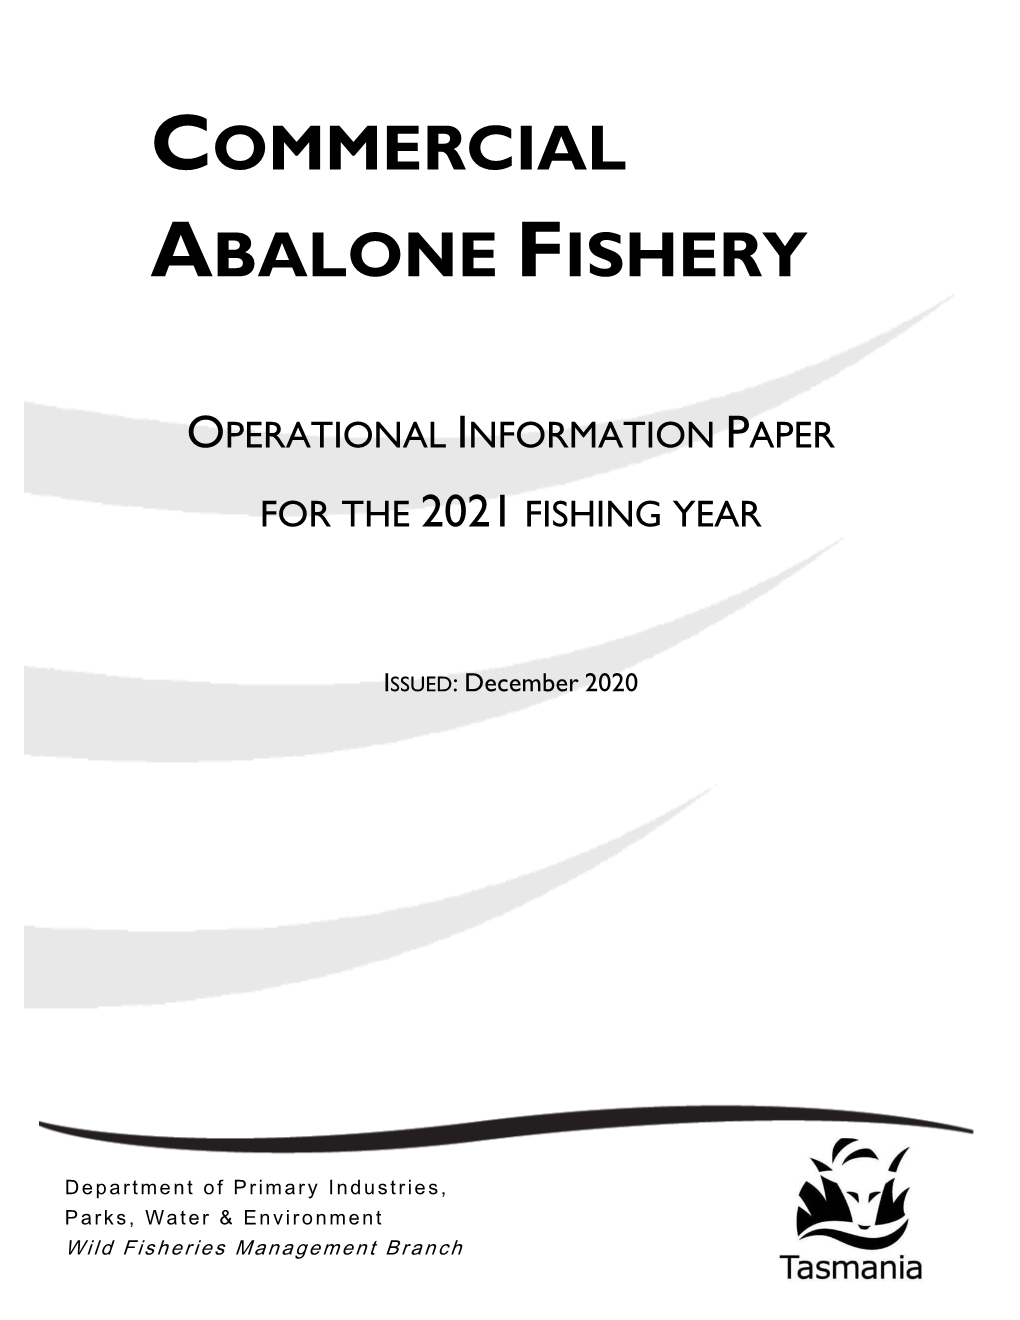 Fishing Zones- 'Parts' of the Fishery